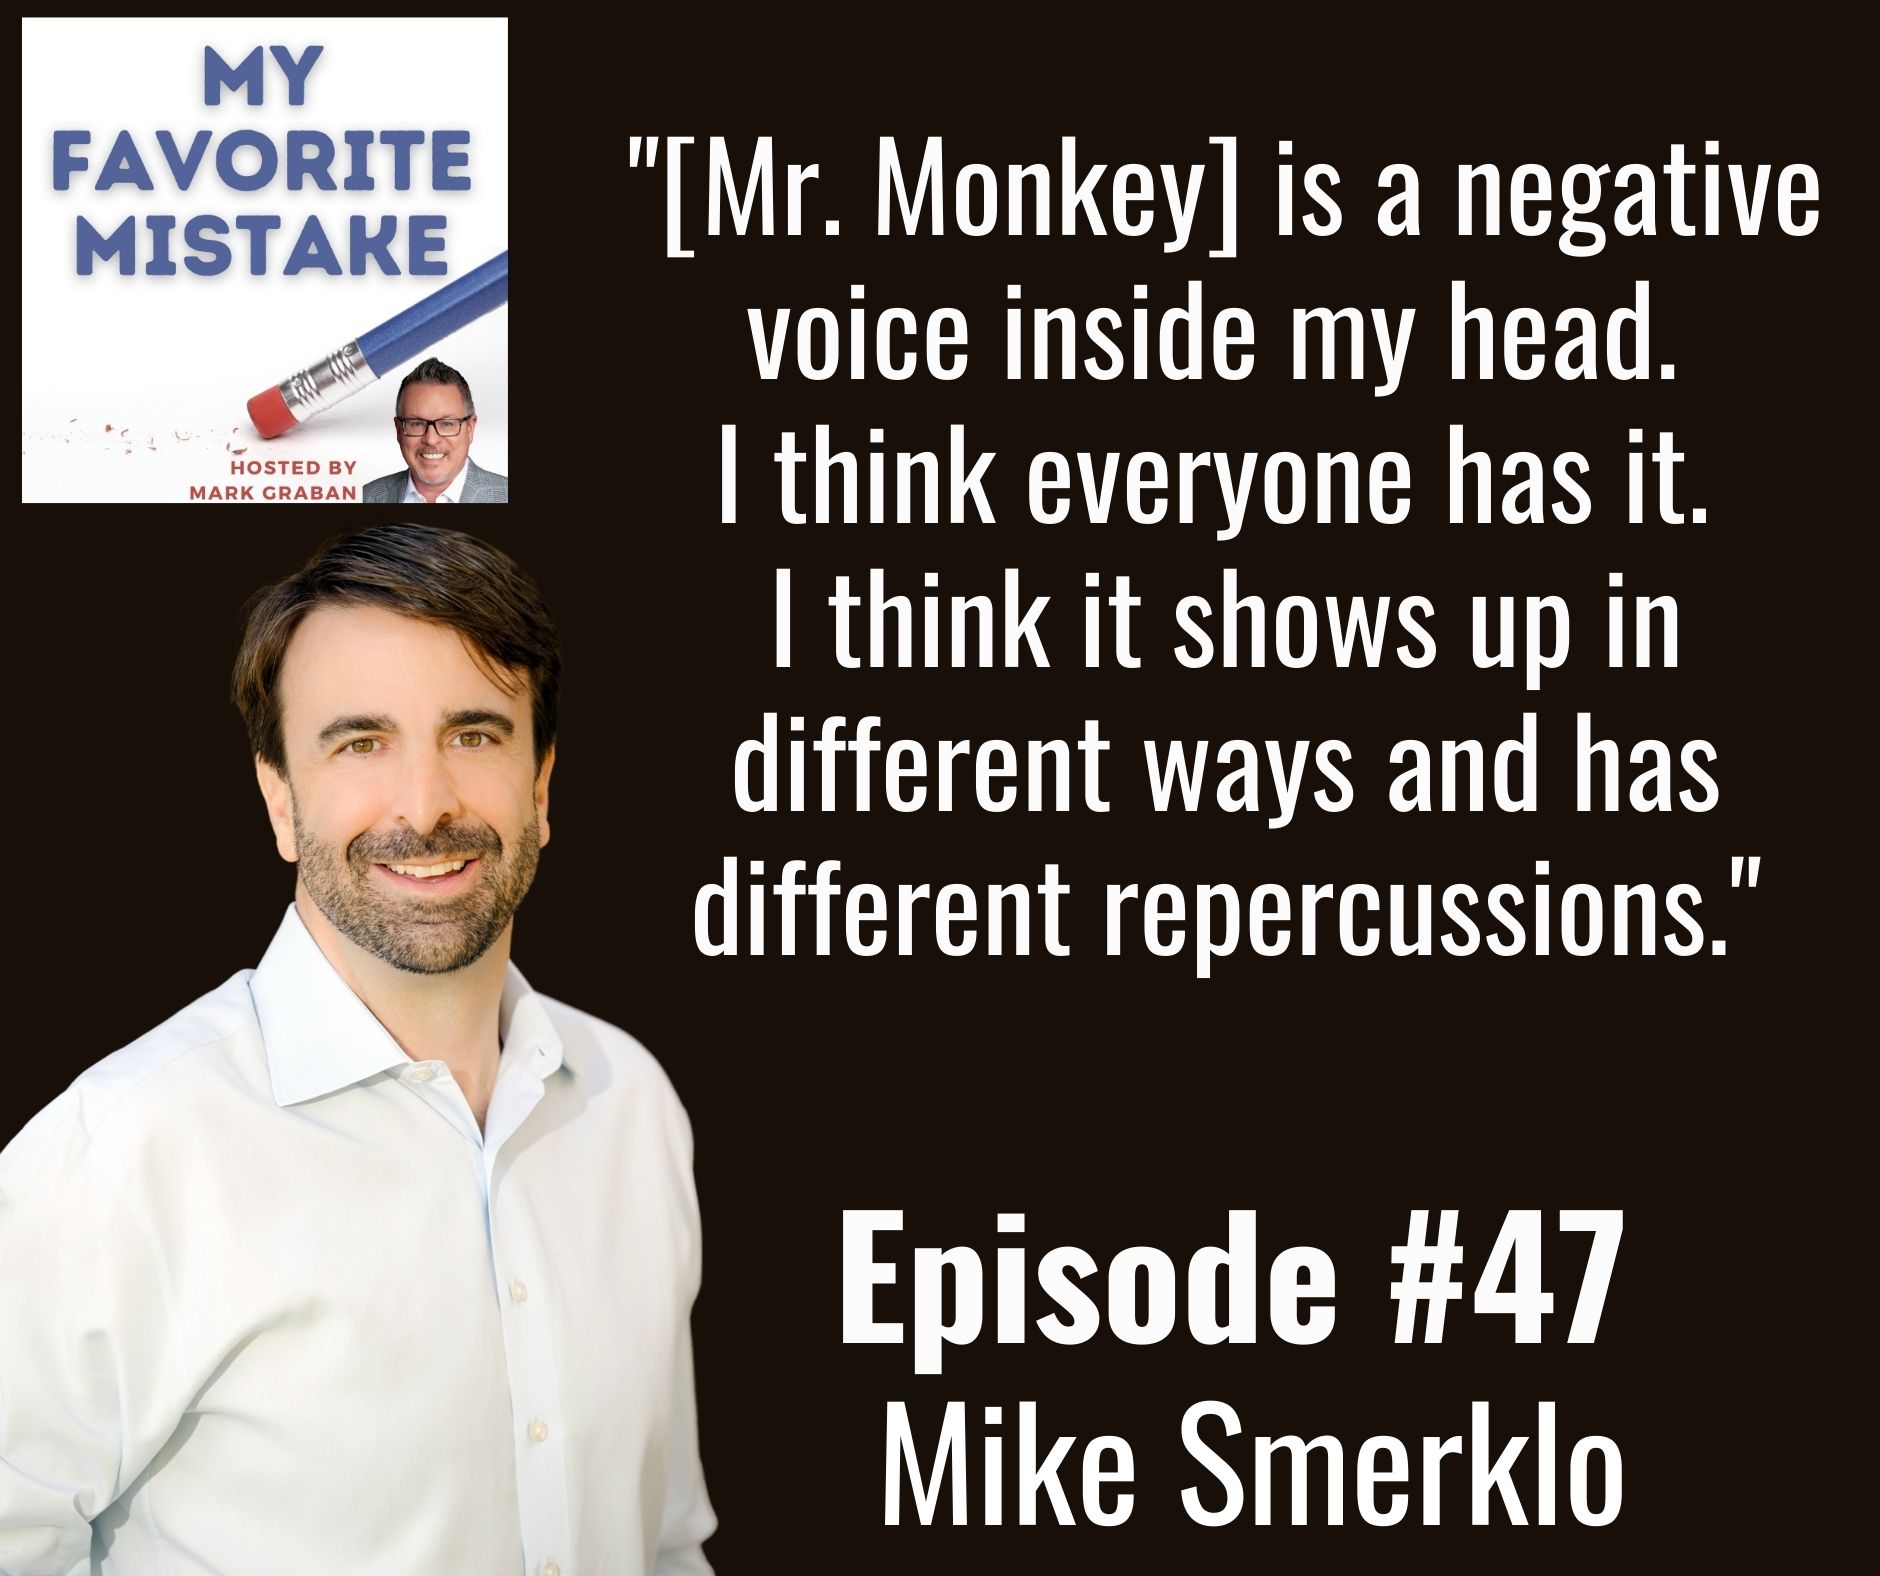 "[Mr. Monkey] is a negative voice inside my head. I think everyone has it. I think it shows up in different ways and has different repercussions."